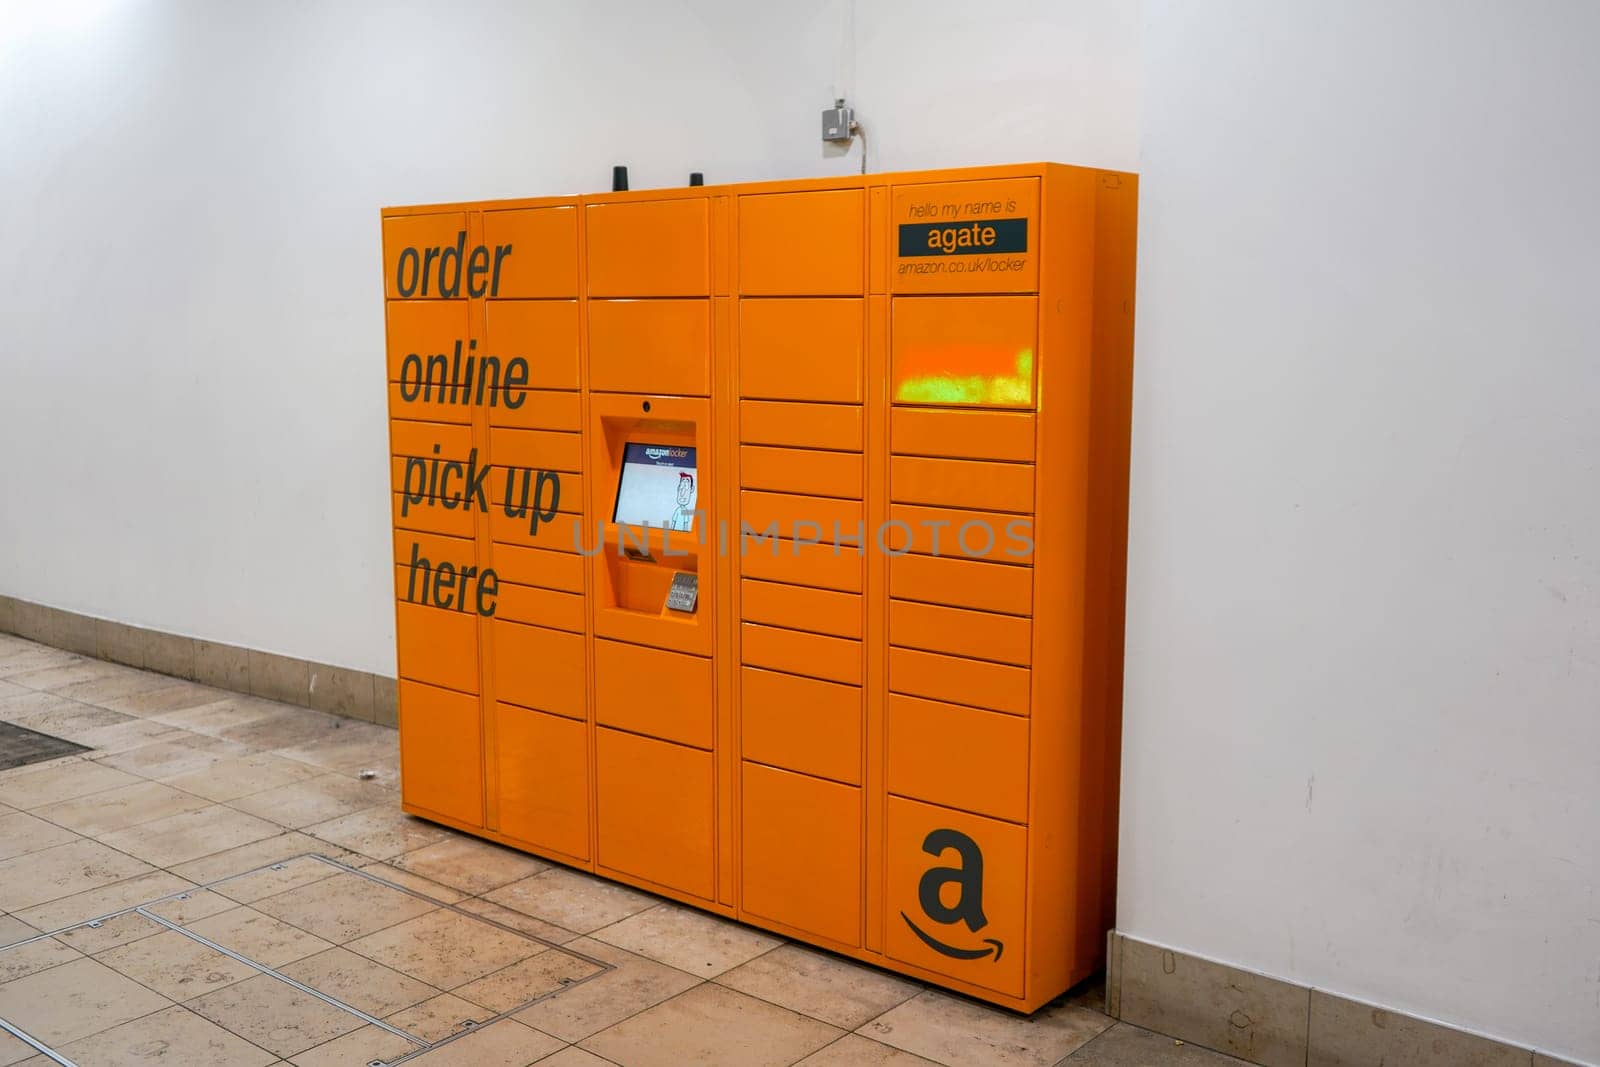 London, United Kingdom - February 03, 2019: Orange Amazon locker in Lewisham shopping centre. Service is used for pick up of orders delivered from on-line store by Ivanko